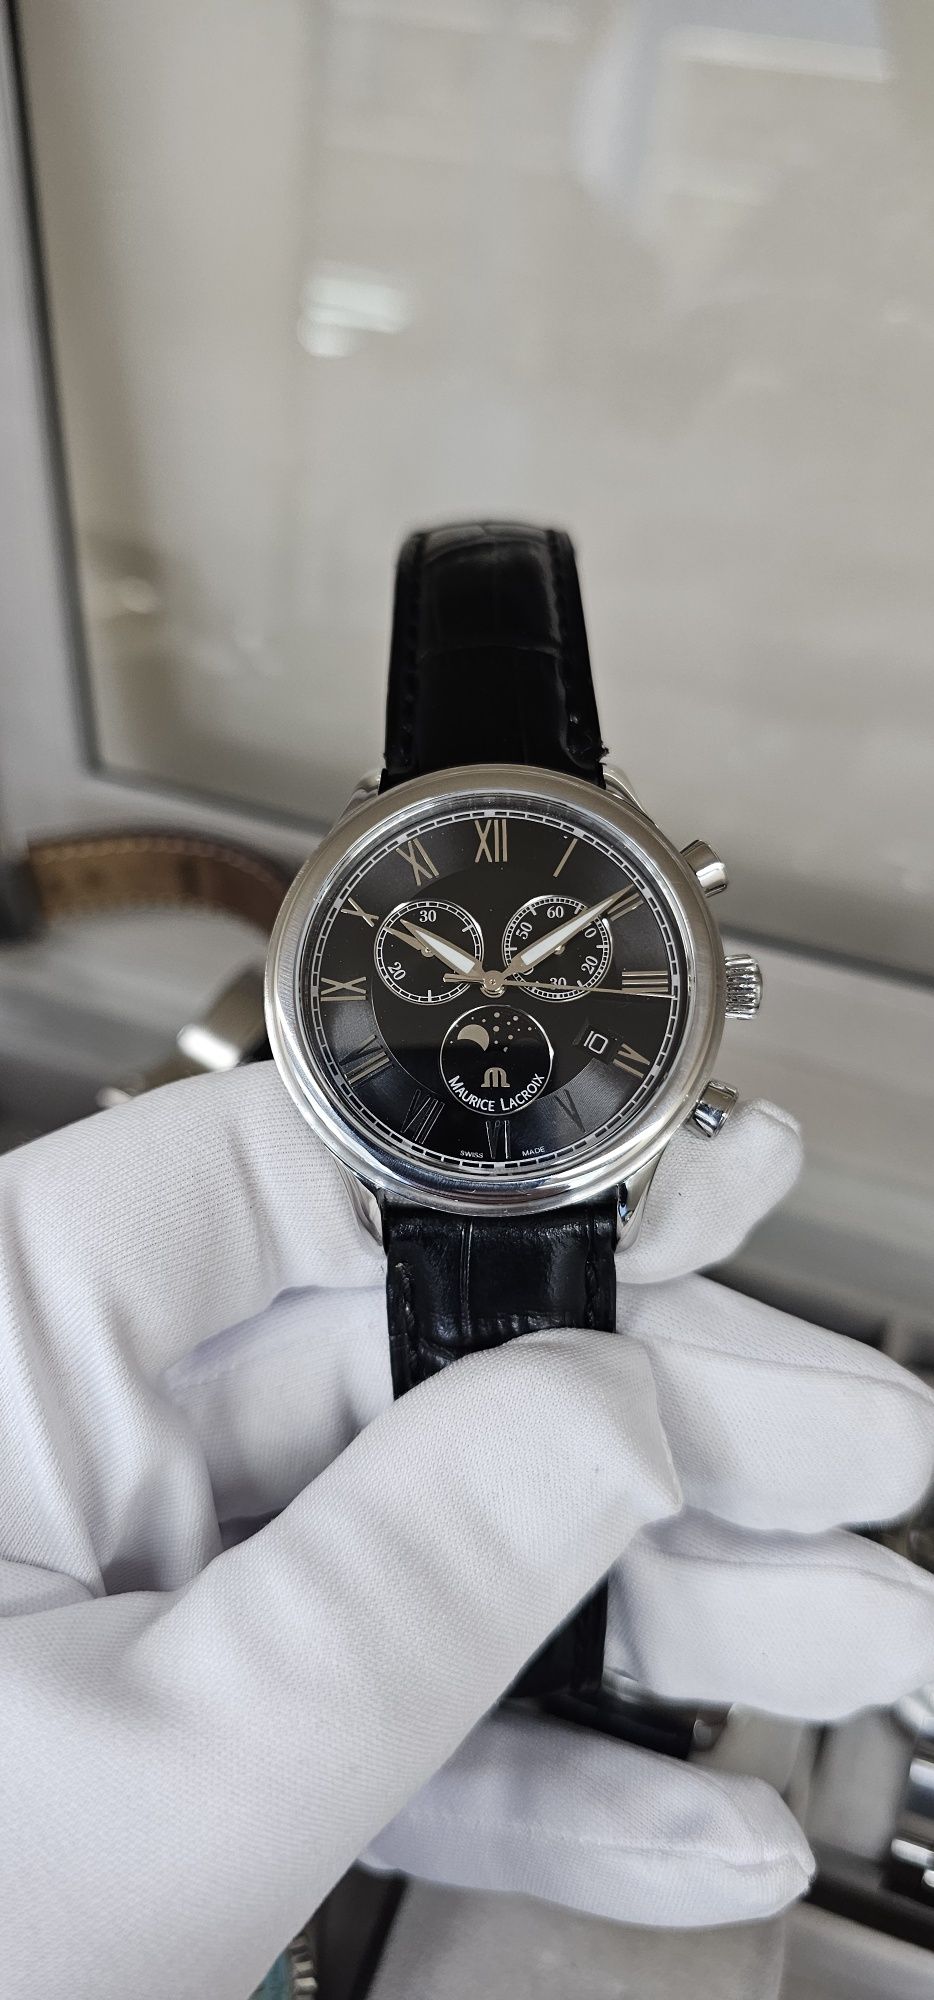 Maurice Lacroix Chronograph Moonphase